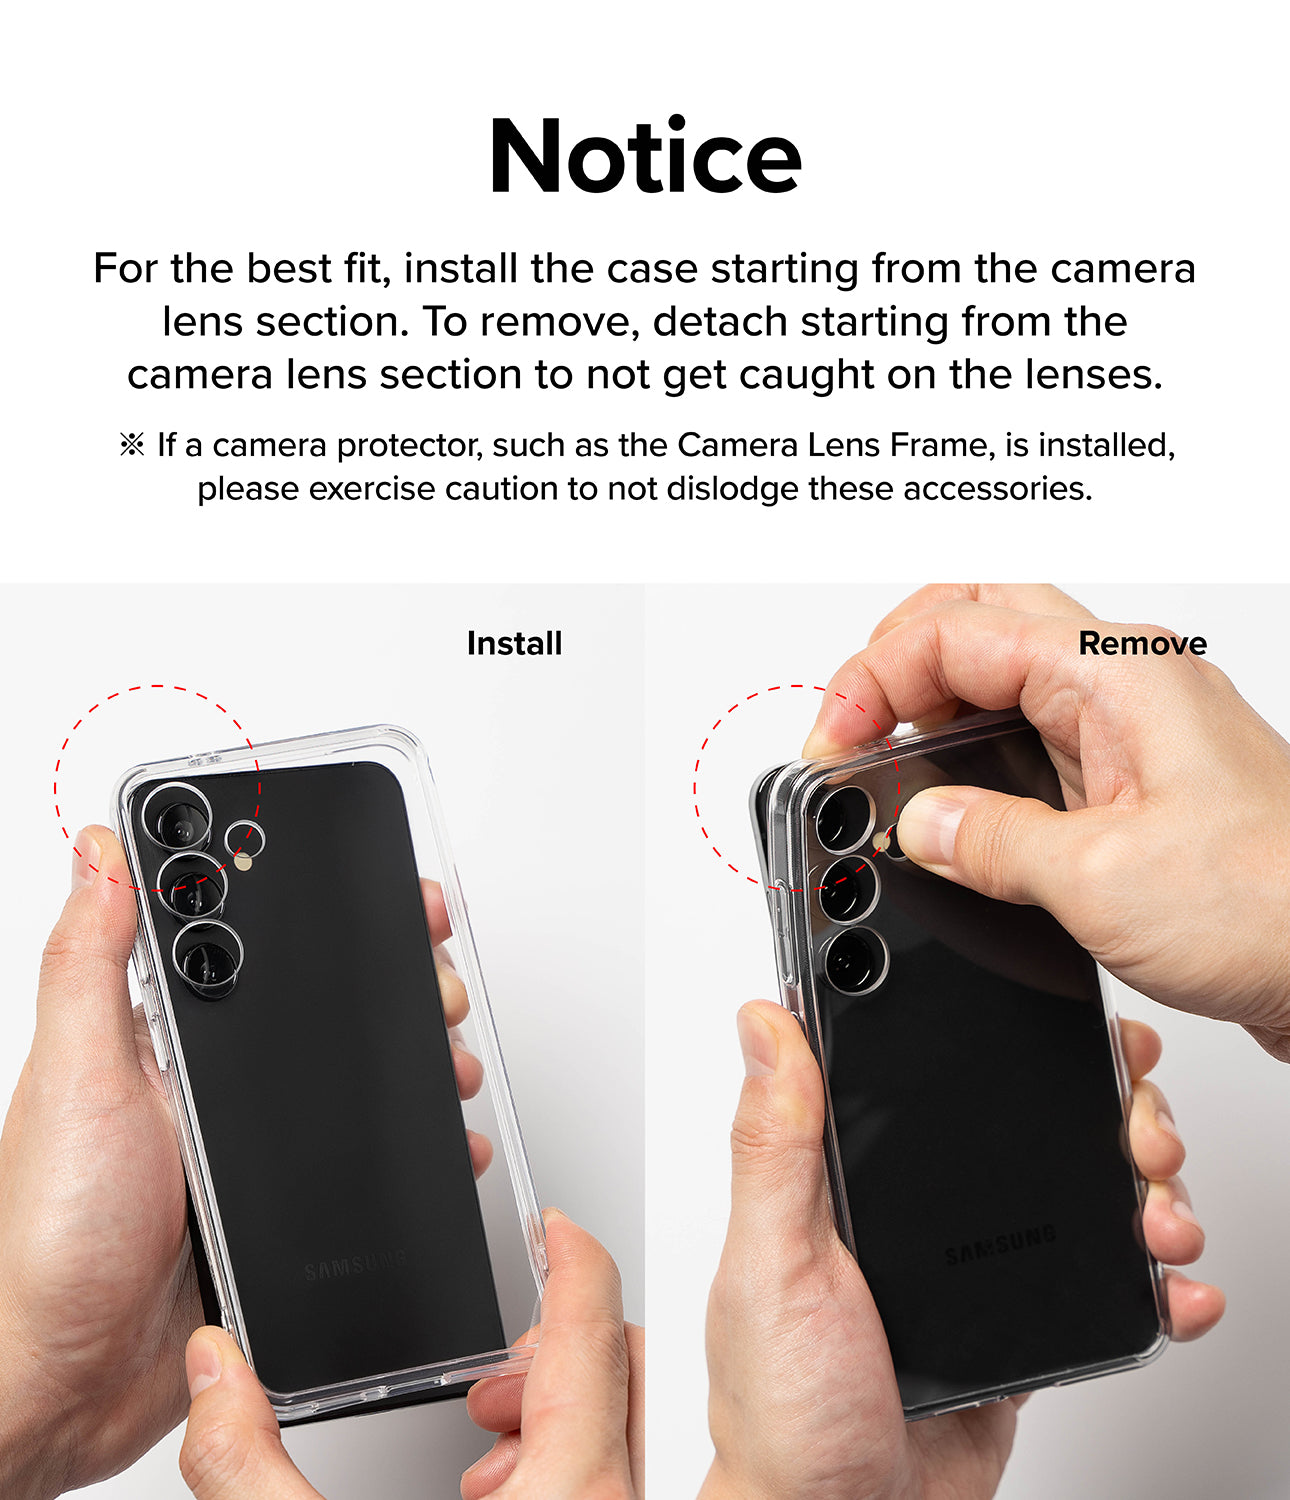 Galaxy S24 Ultra Case | Alles - Notice. For the best fit, install the case starting from the camera lens section. To remove, detach starting from the camera lens section to not get caught on the lenses.